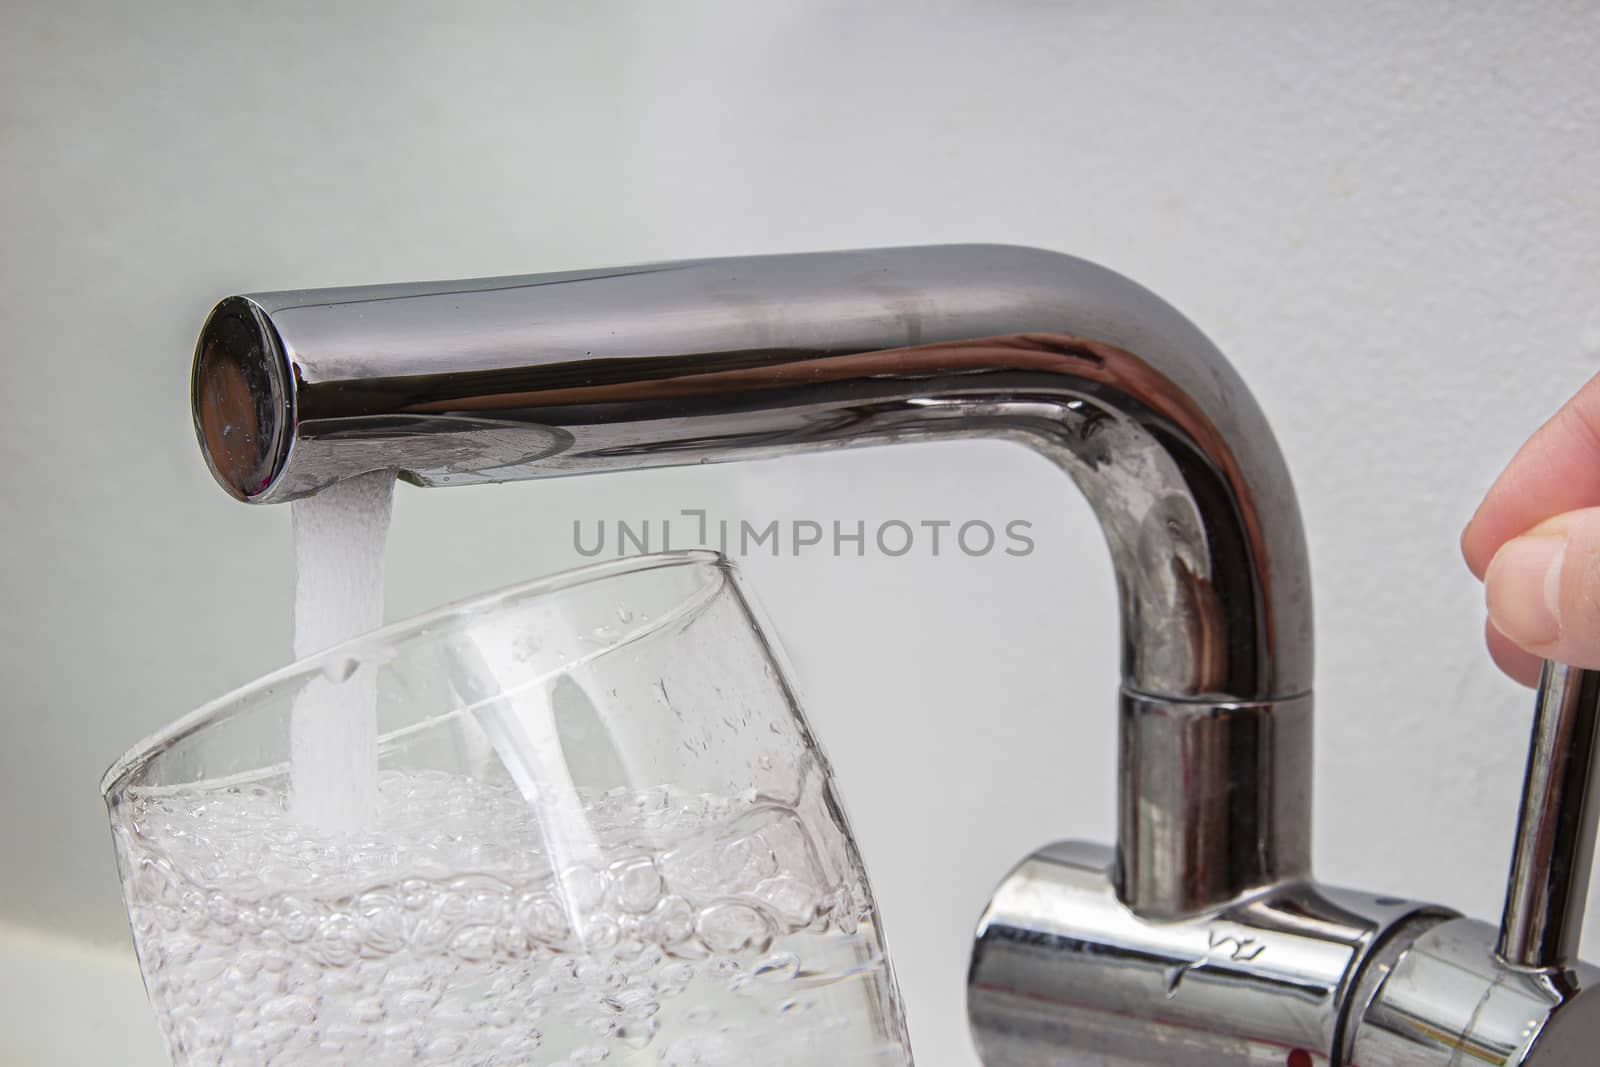 Glass at water tap and filling water with lead contamination by oasisamuel